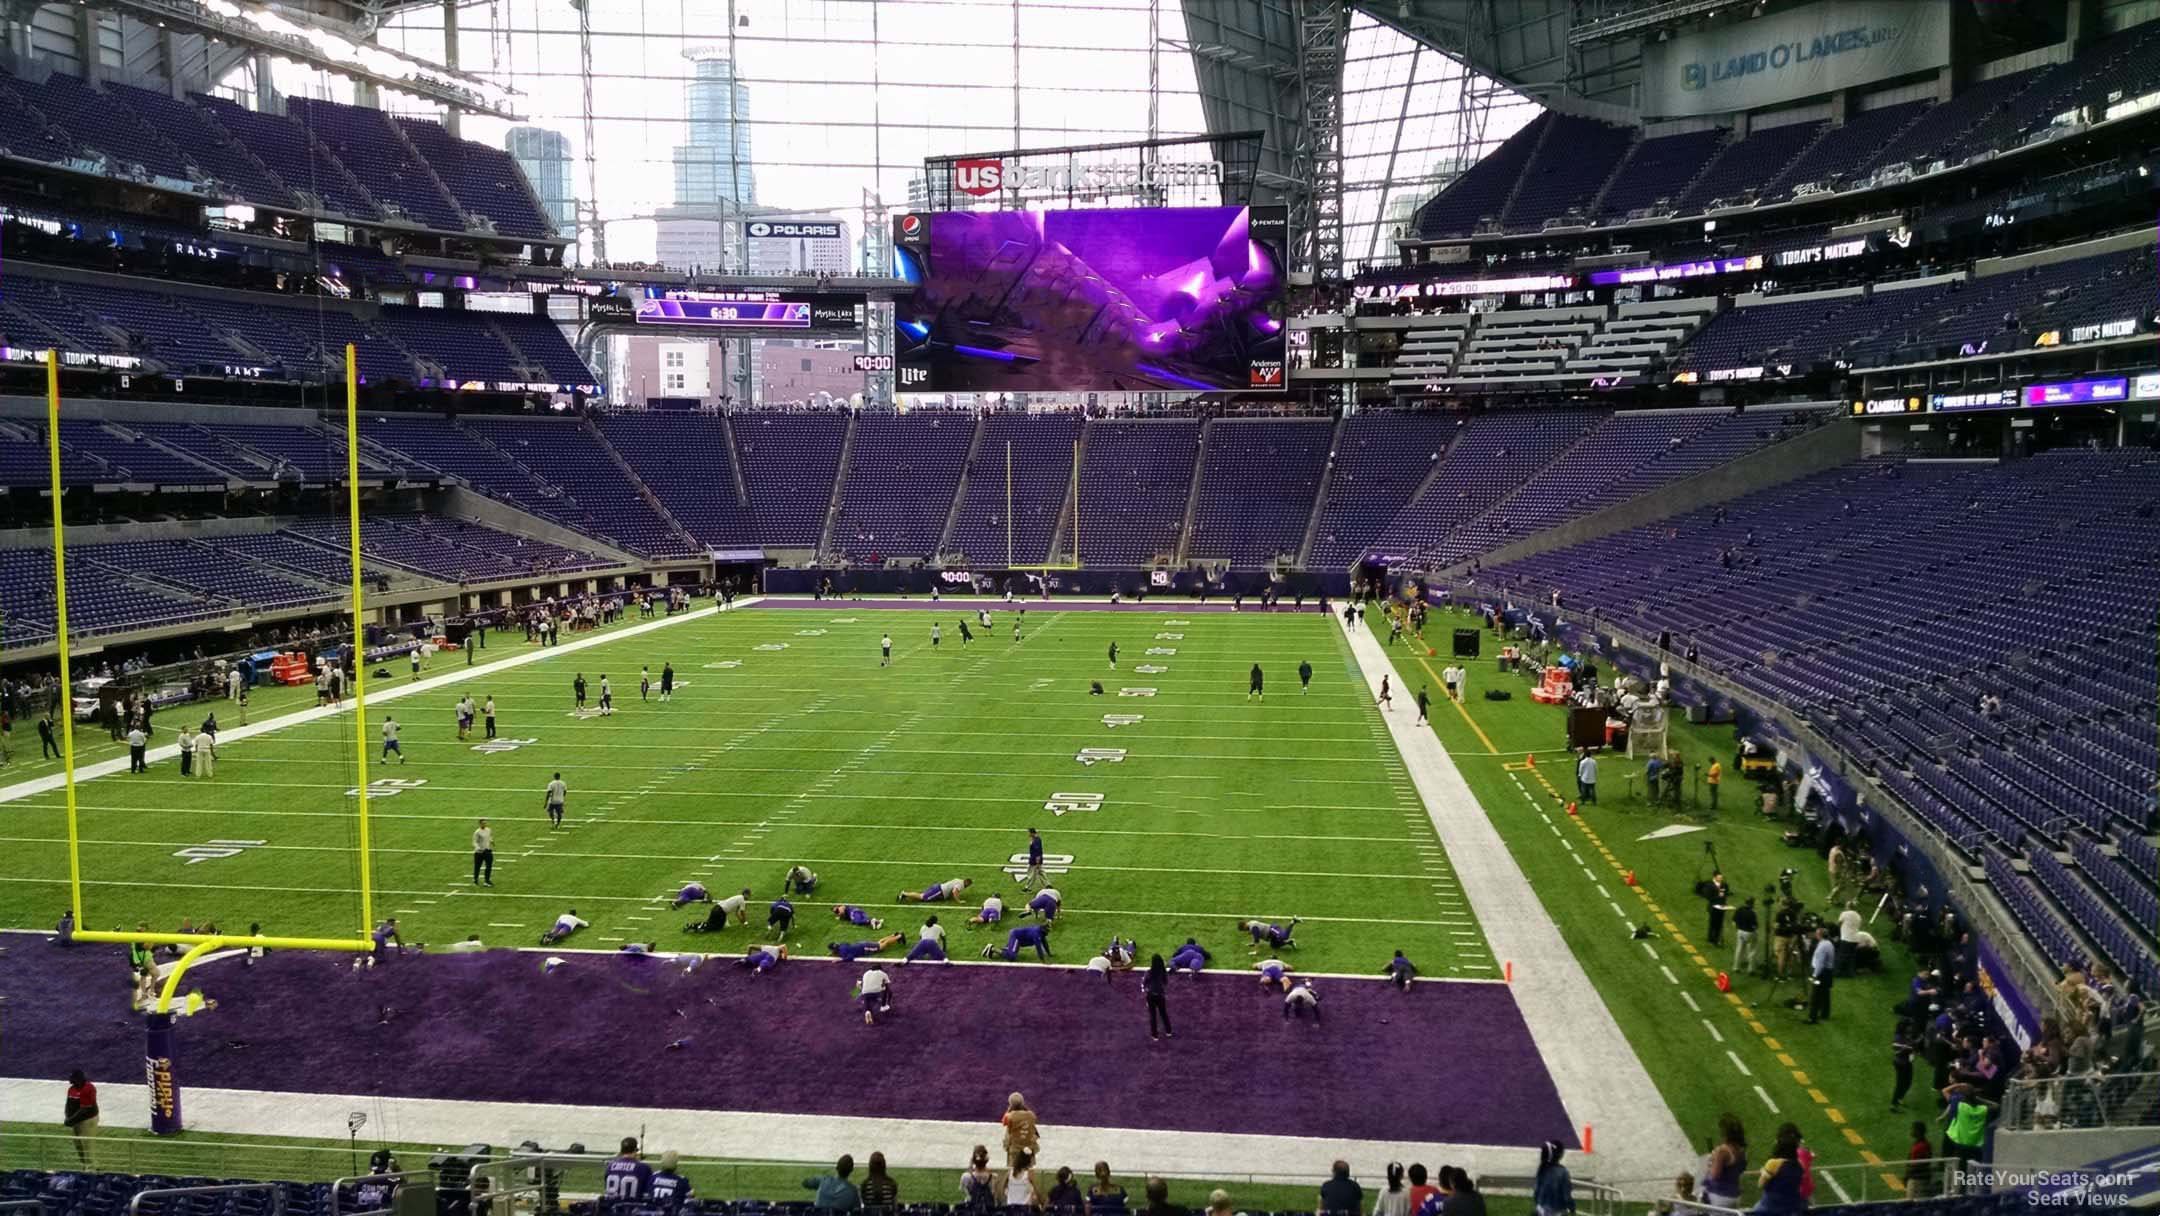 section 118, row 24 seat view  for football - u.s. bank stadium